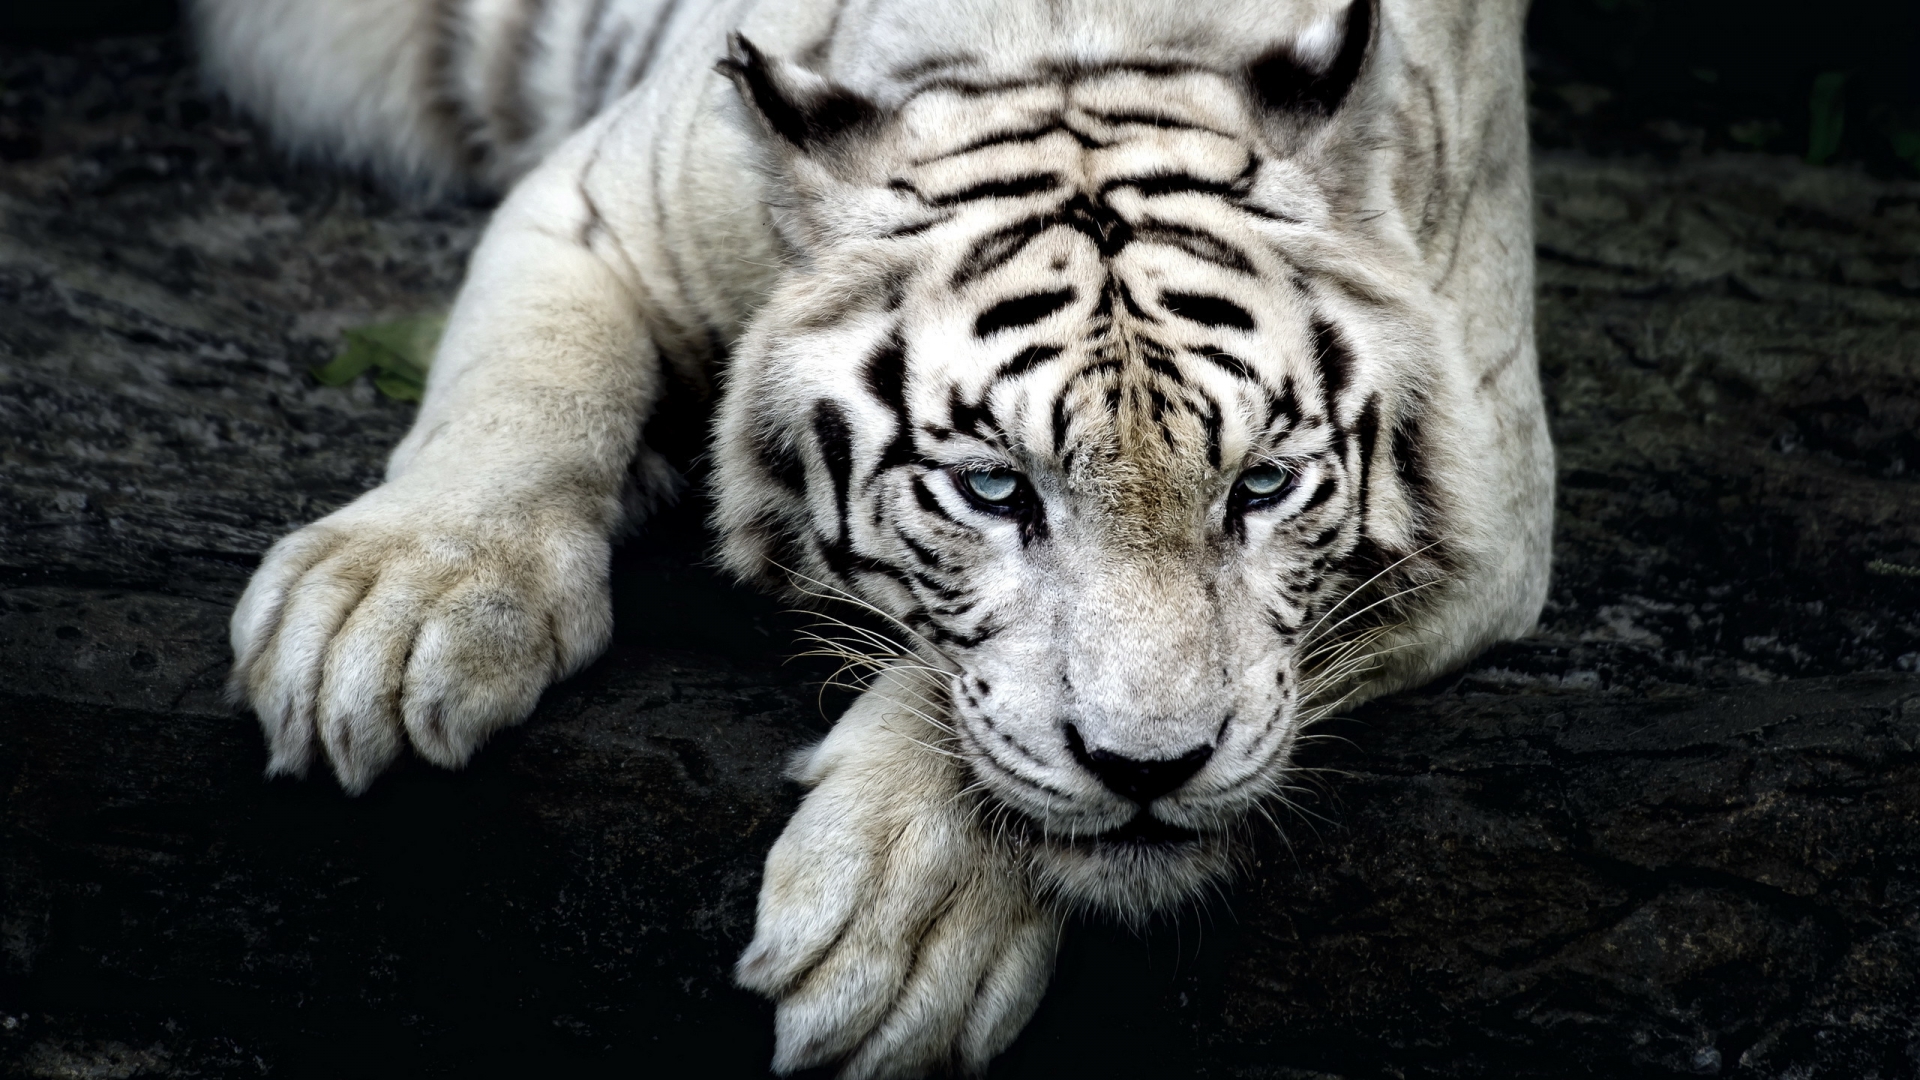 Amazing White Tiger for 1920 x 1080 HDTV 1080p resolution